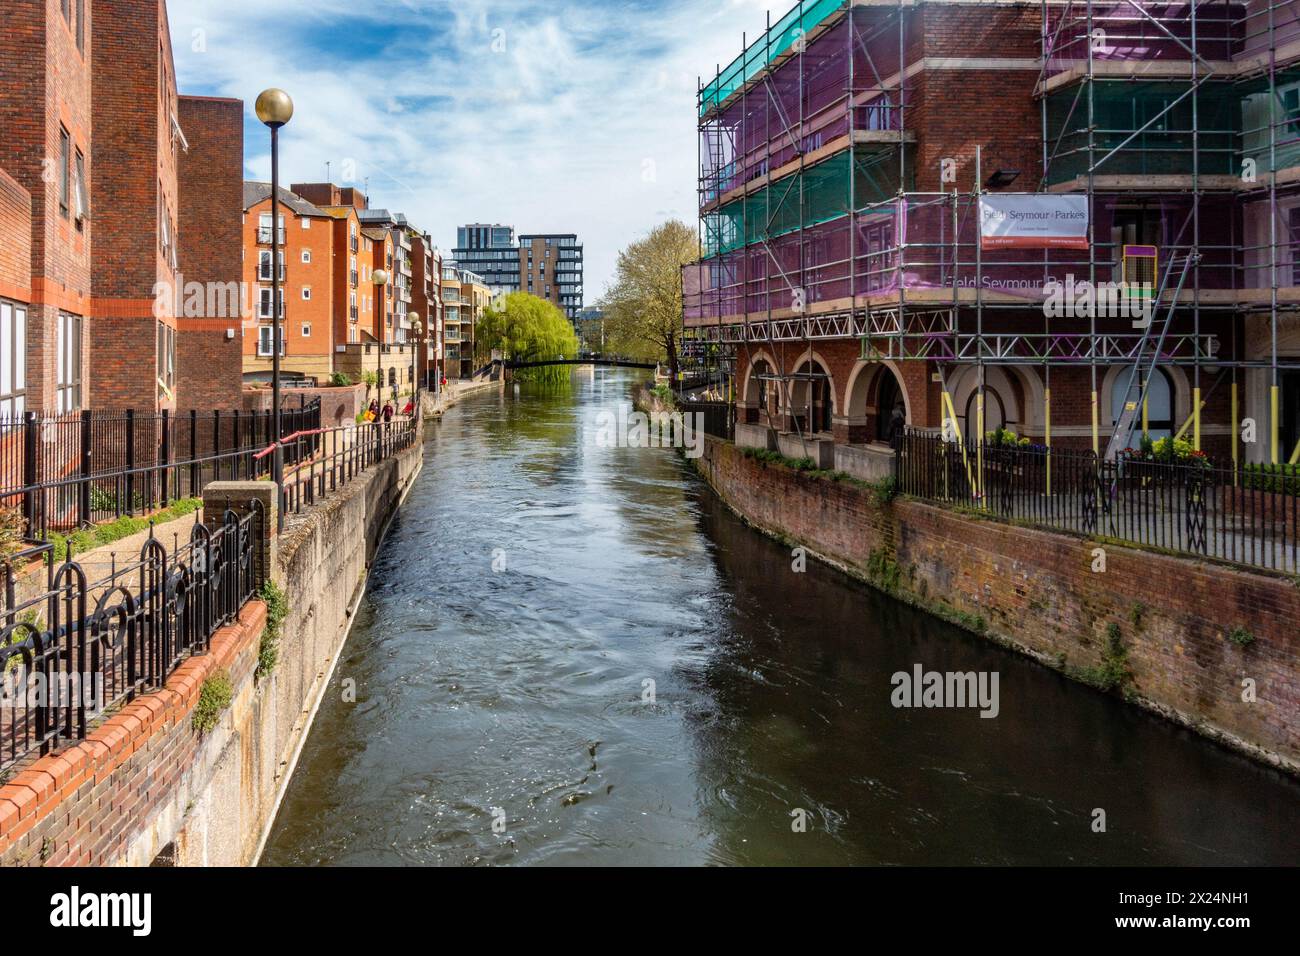 The River Kennet flows through Reading town centre in Berkshire, UK Stock Photo